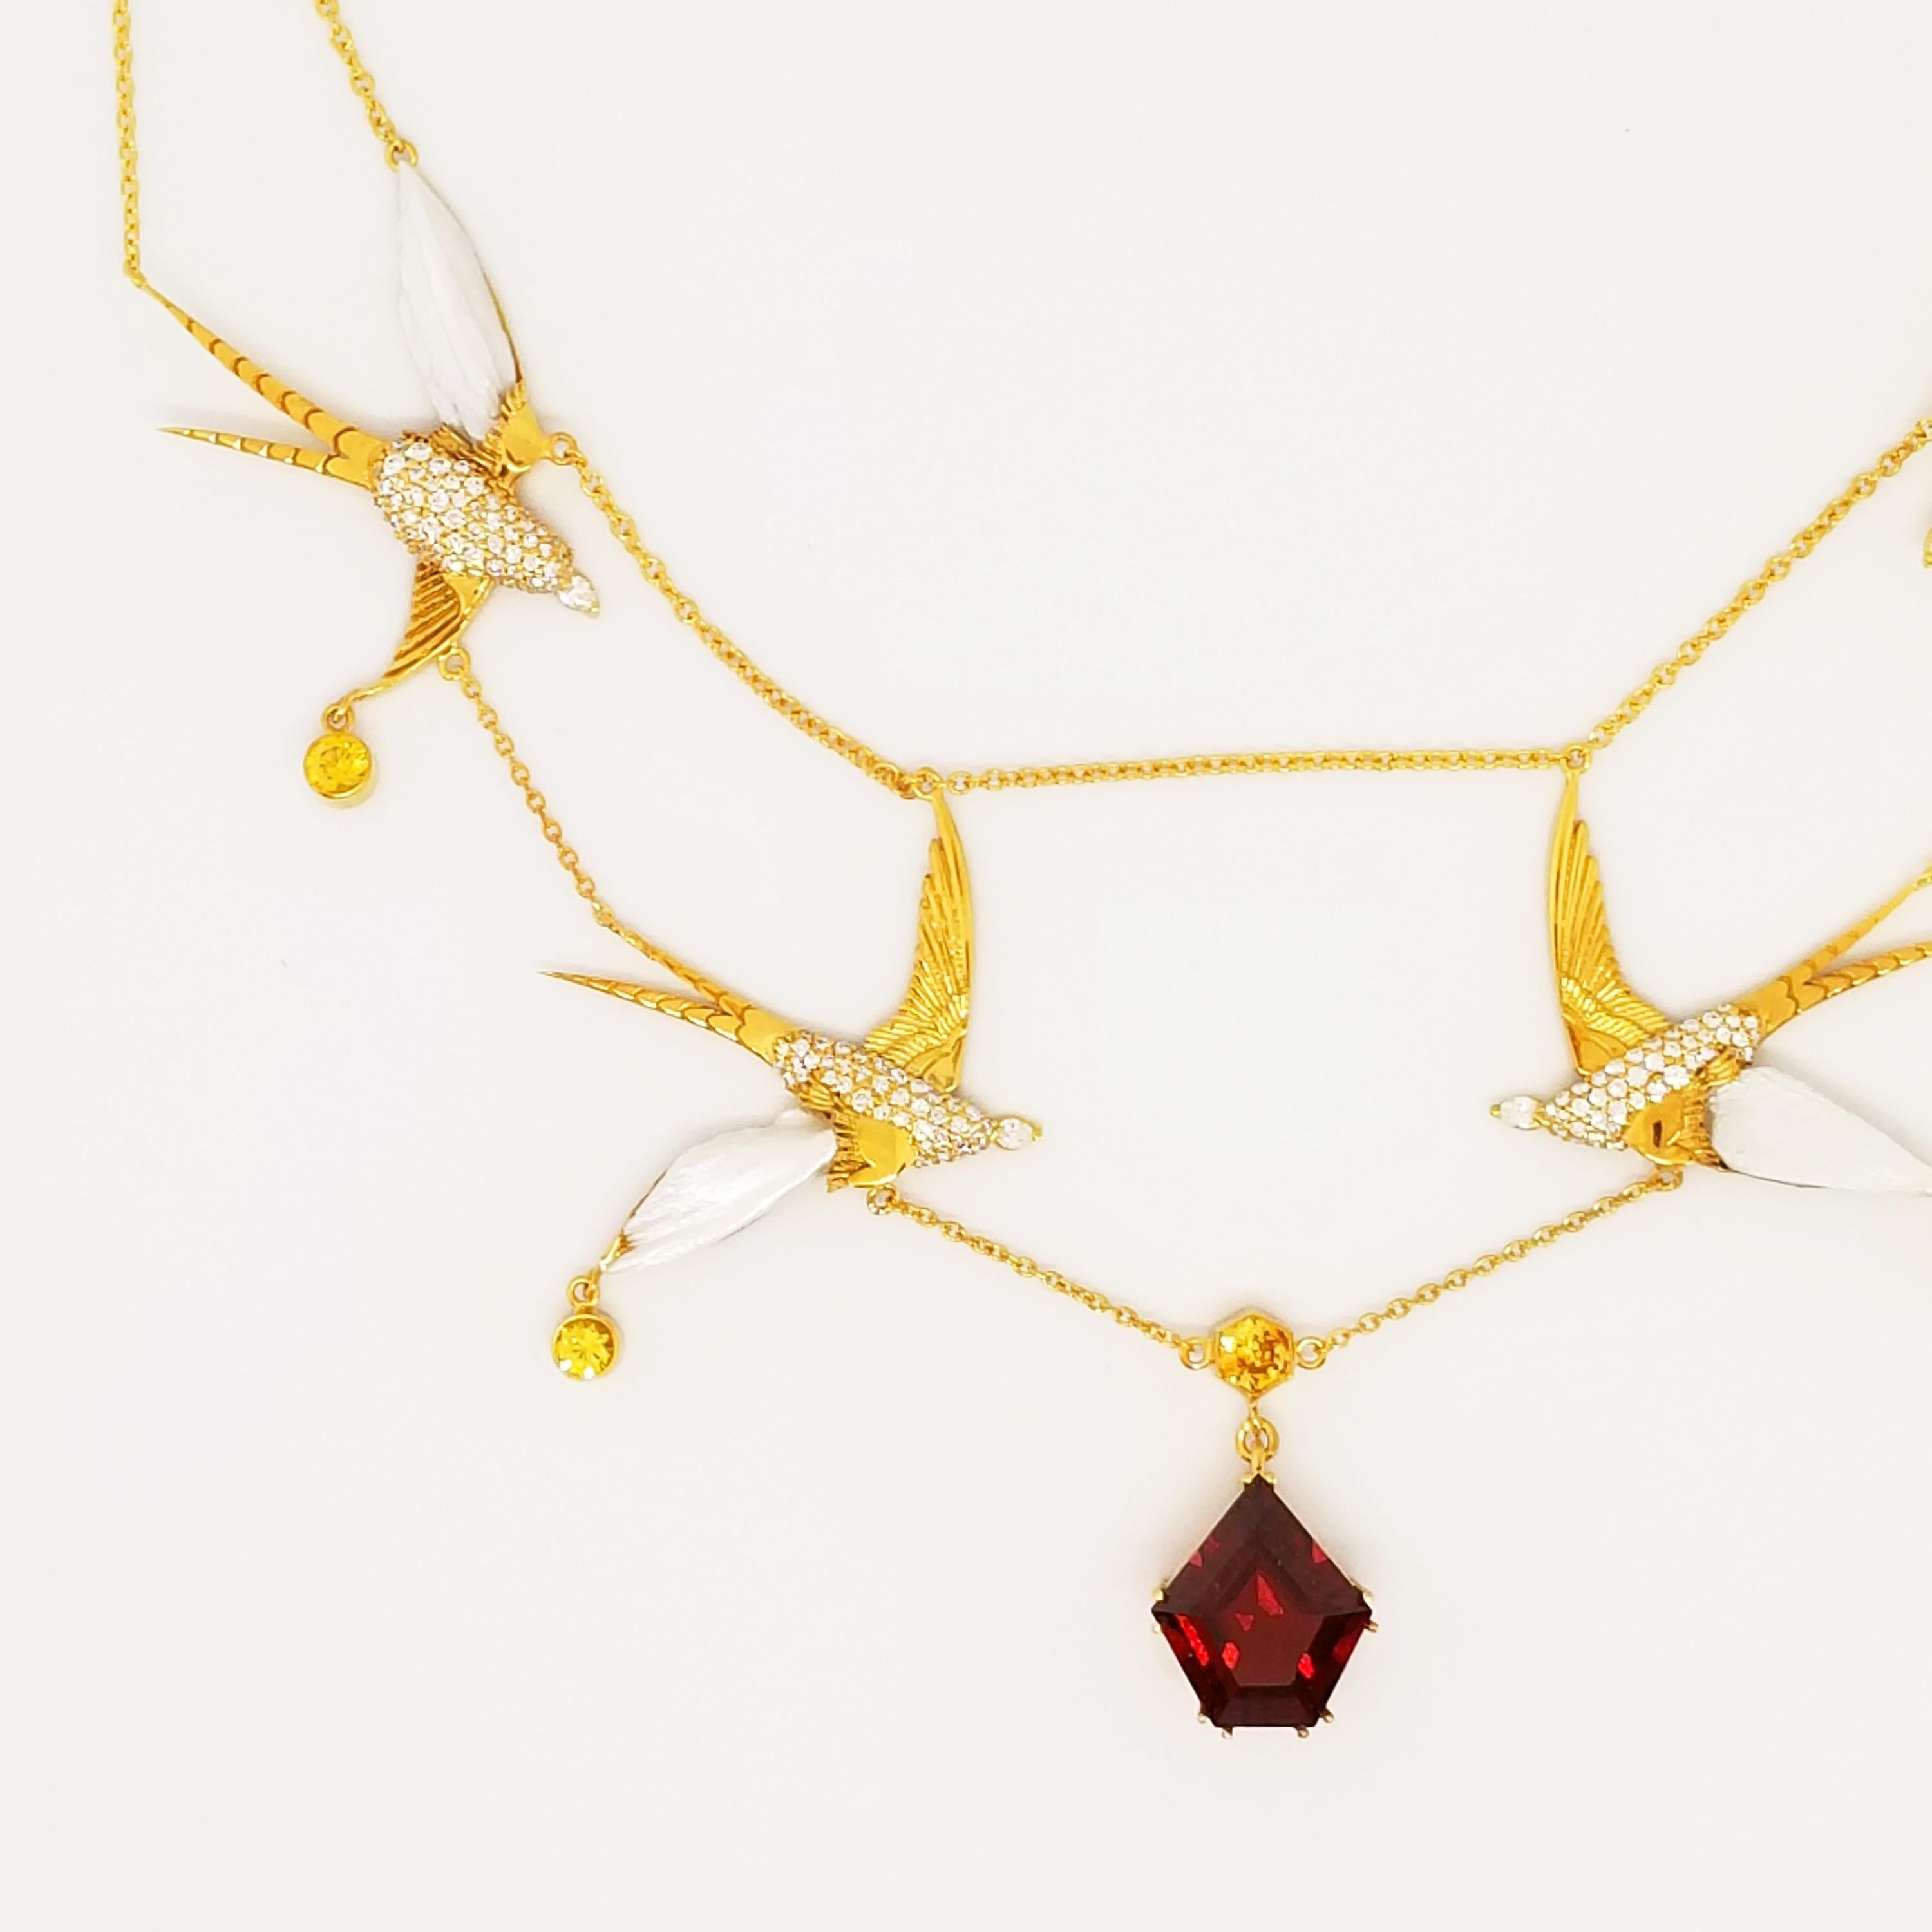 This Custom Designed and Crafted, One of a Kind Swag Necklace by Artisan Tom Castor features four elegant Swallow Birds. Attached on the double chain Swag style Necklace, the birds frame the Décolletage while directing attention to the Brilliant Red